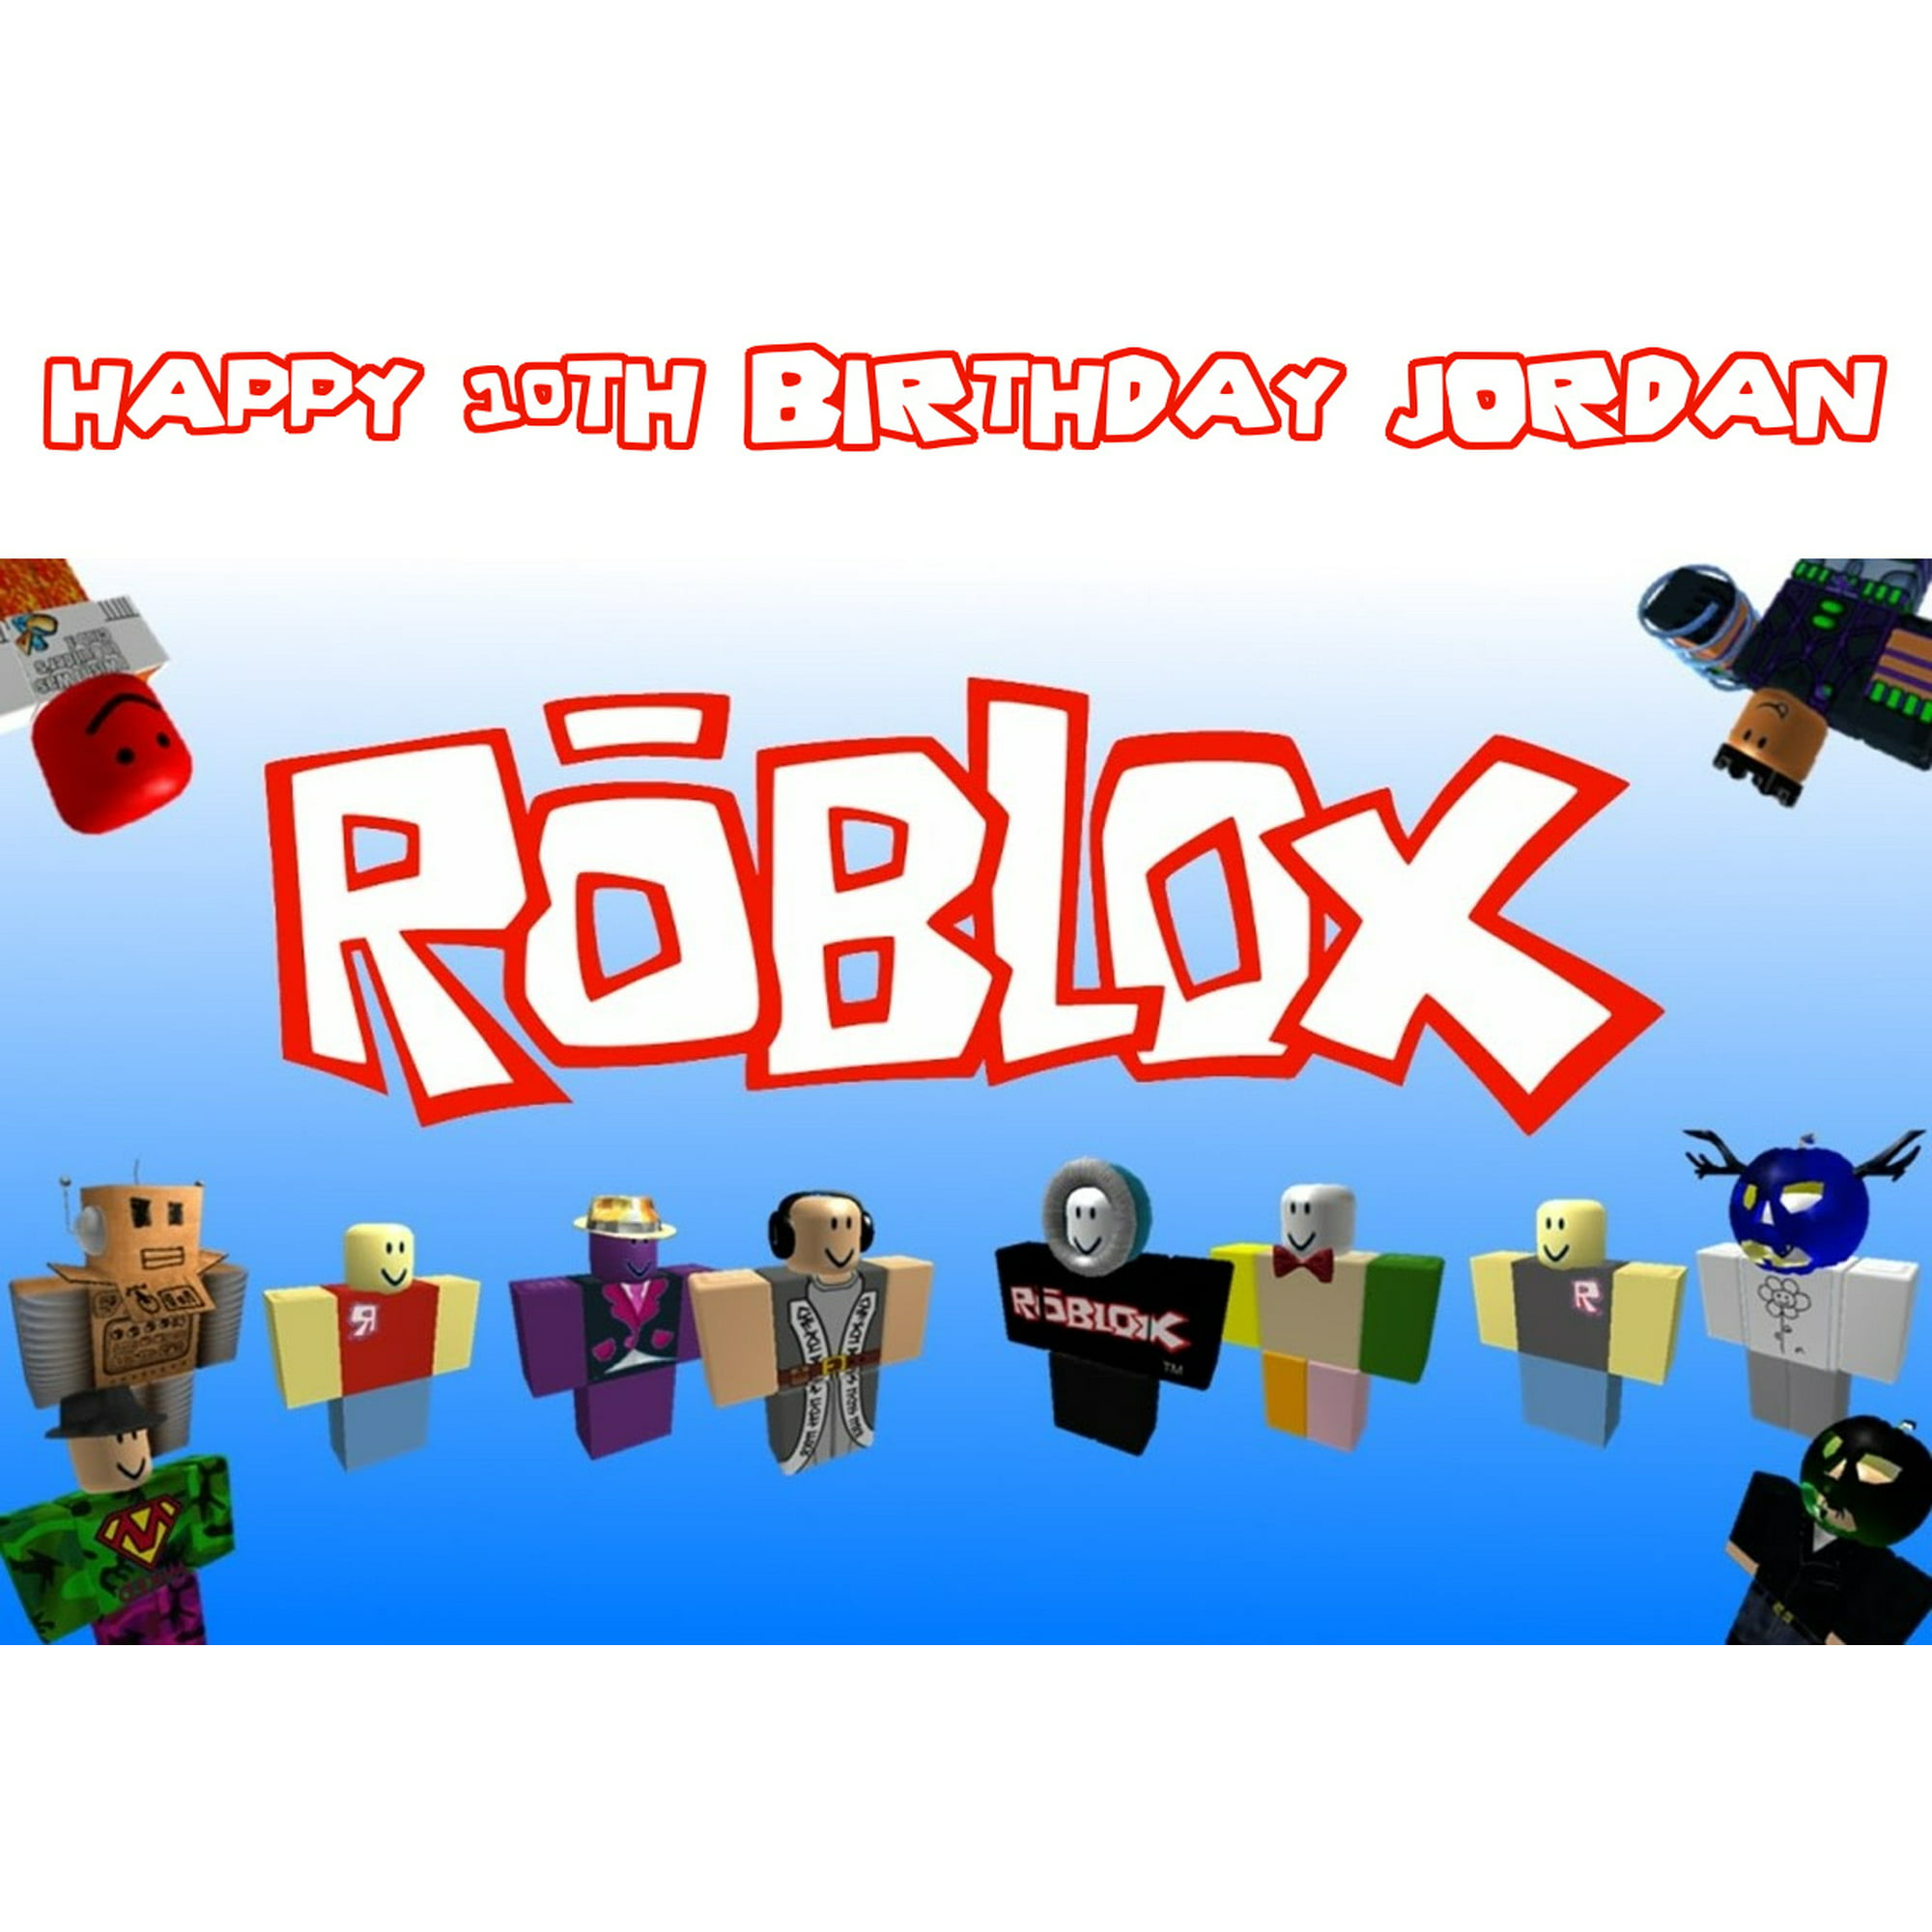 Roblox Custom Player Happy Birthday Edible Cake Topper Image Abpid00150v1 Walmart Com Walmart Com - how to change your birthday in roblox 2020 guide